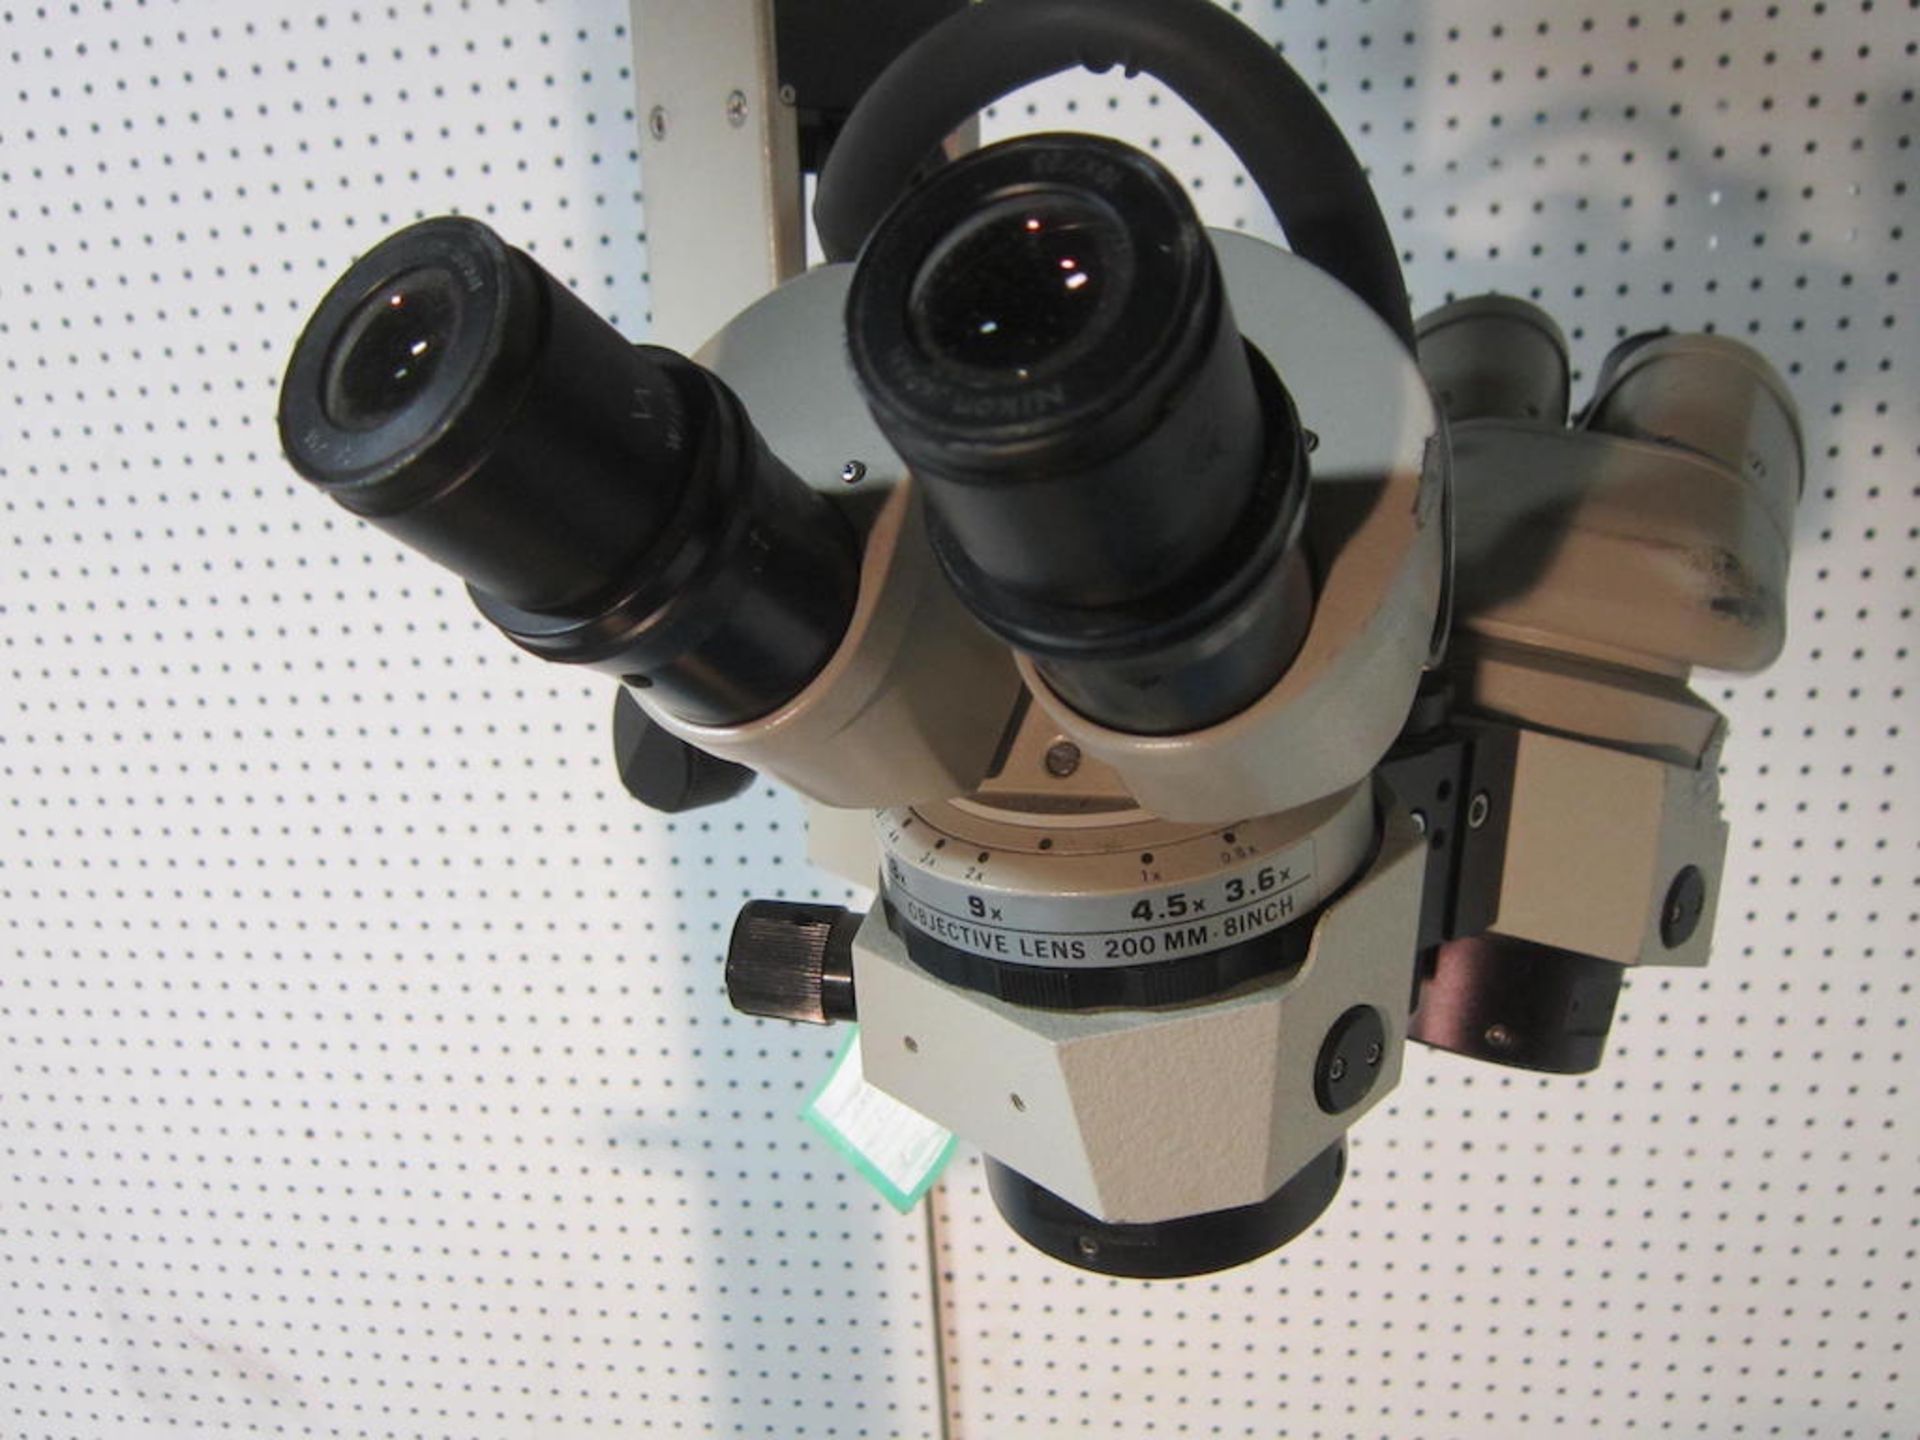 Weck Surgical Systems Microscope 1402 B12 with Light, Object Lens 200mm with Foot Switch - Image 5 of 16